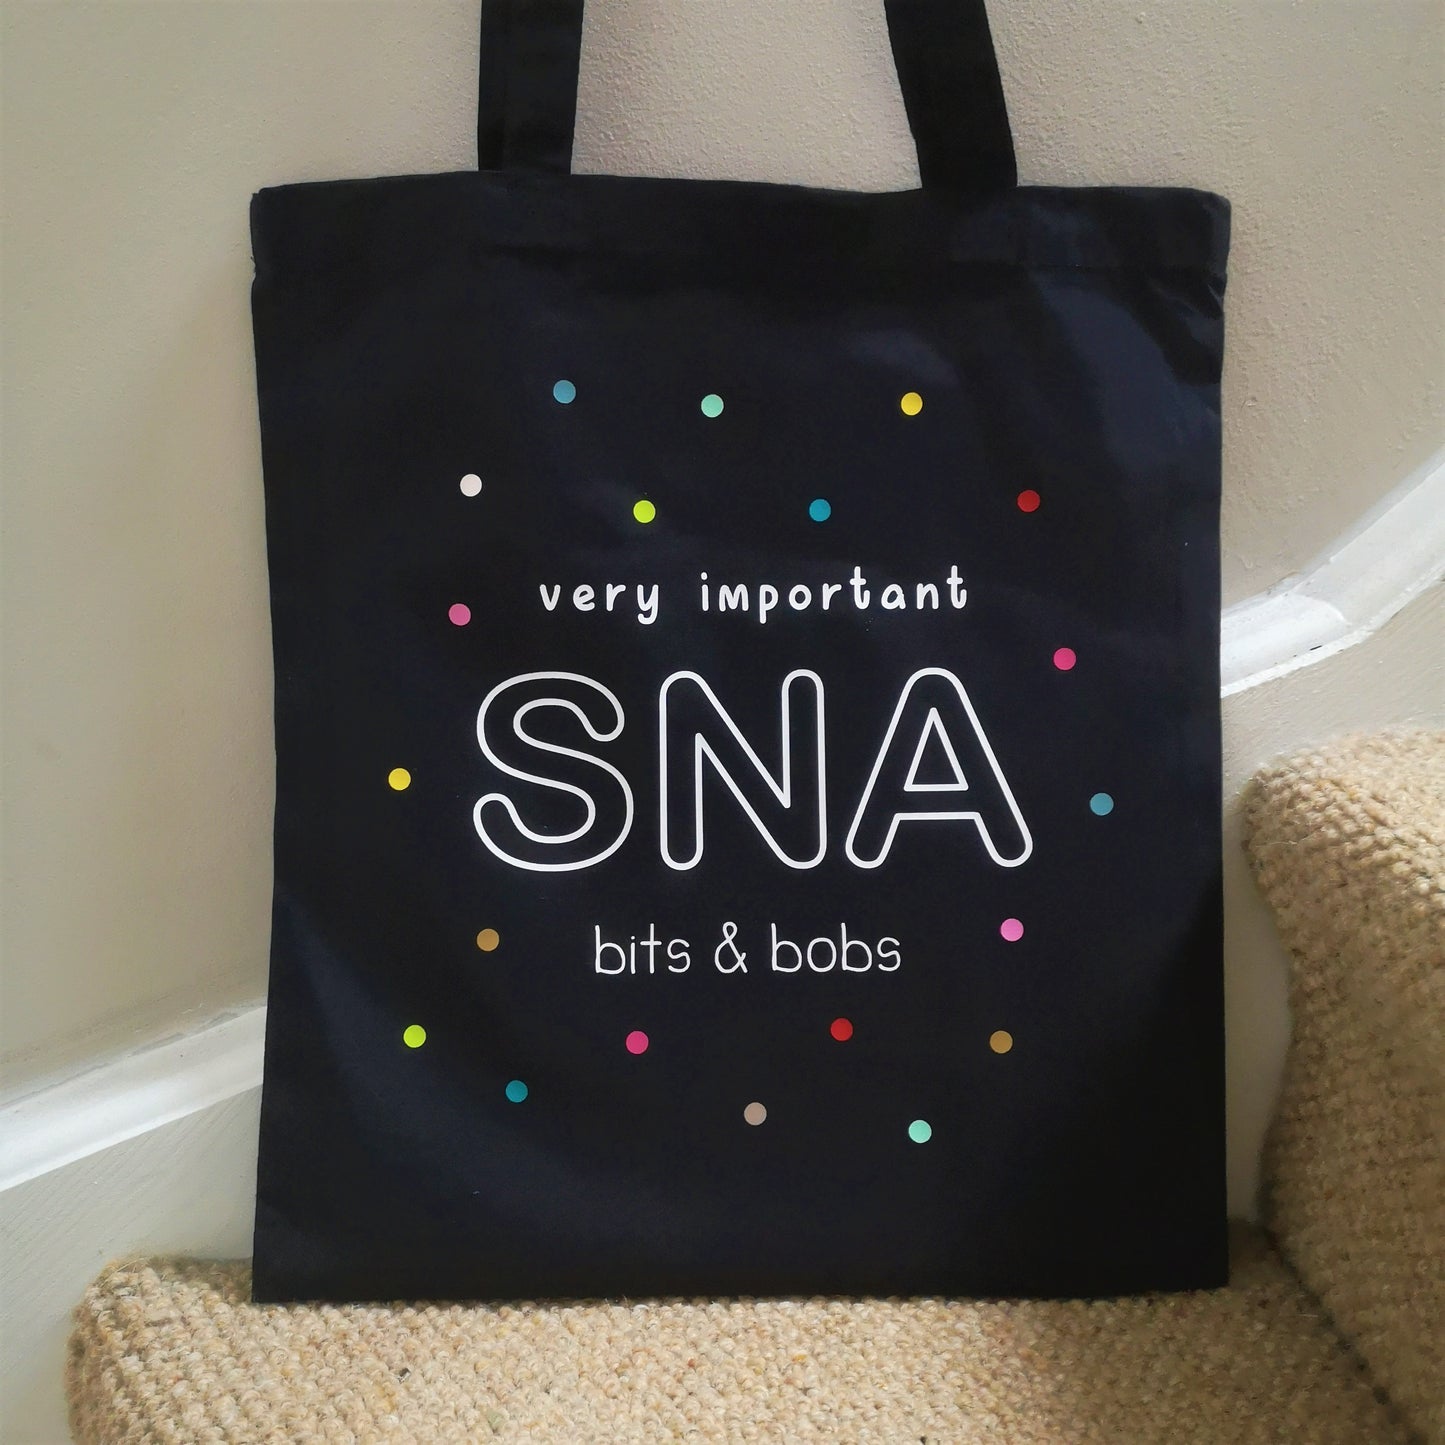 A personalised lightweight black cotton tote with VERY IMPORTANT SNA BITS & BOBS on it. The text is surrounded with multicoloured polkadots